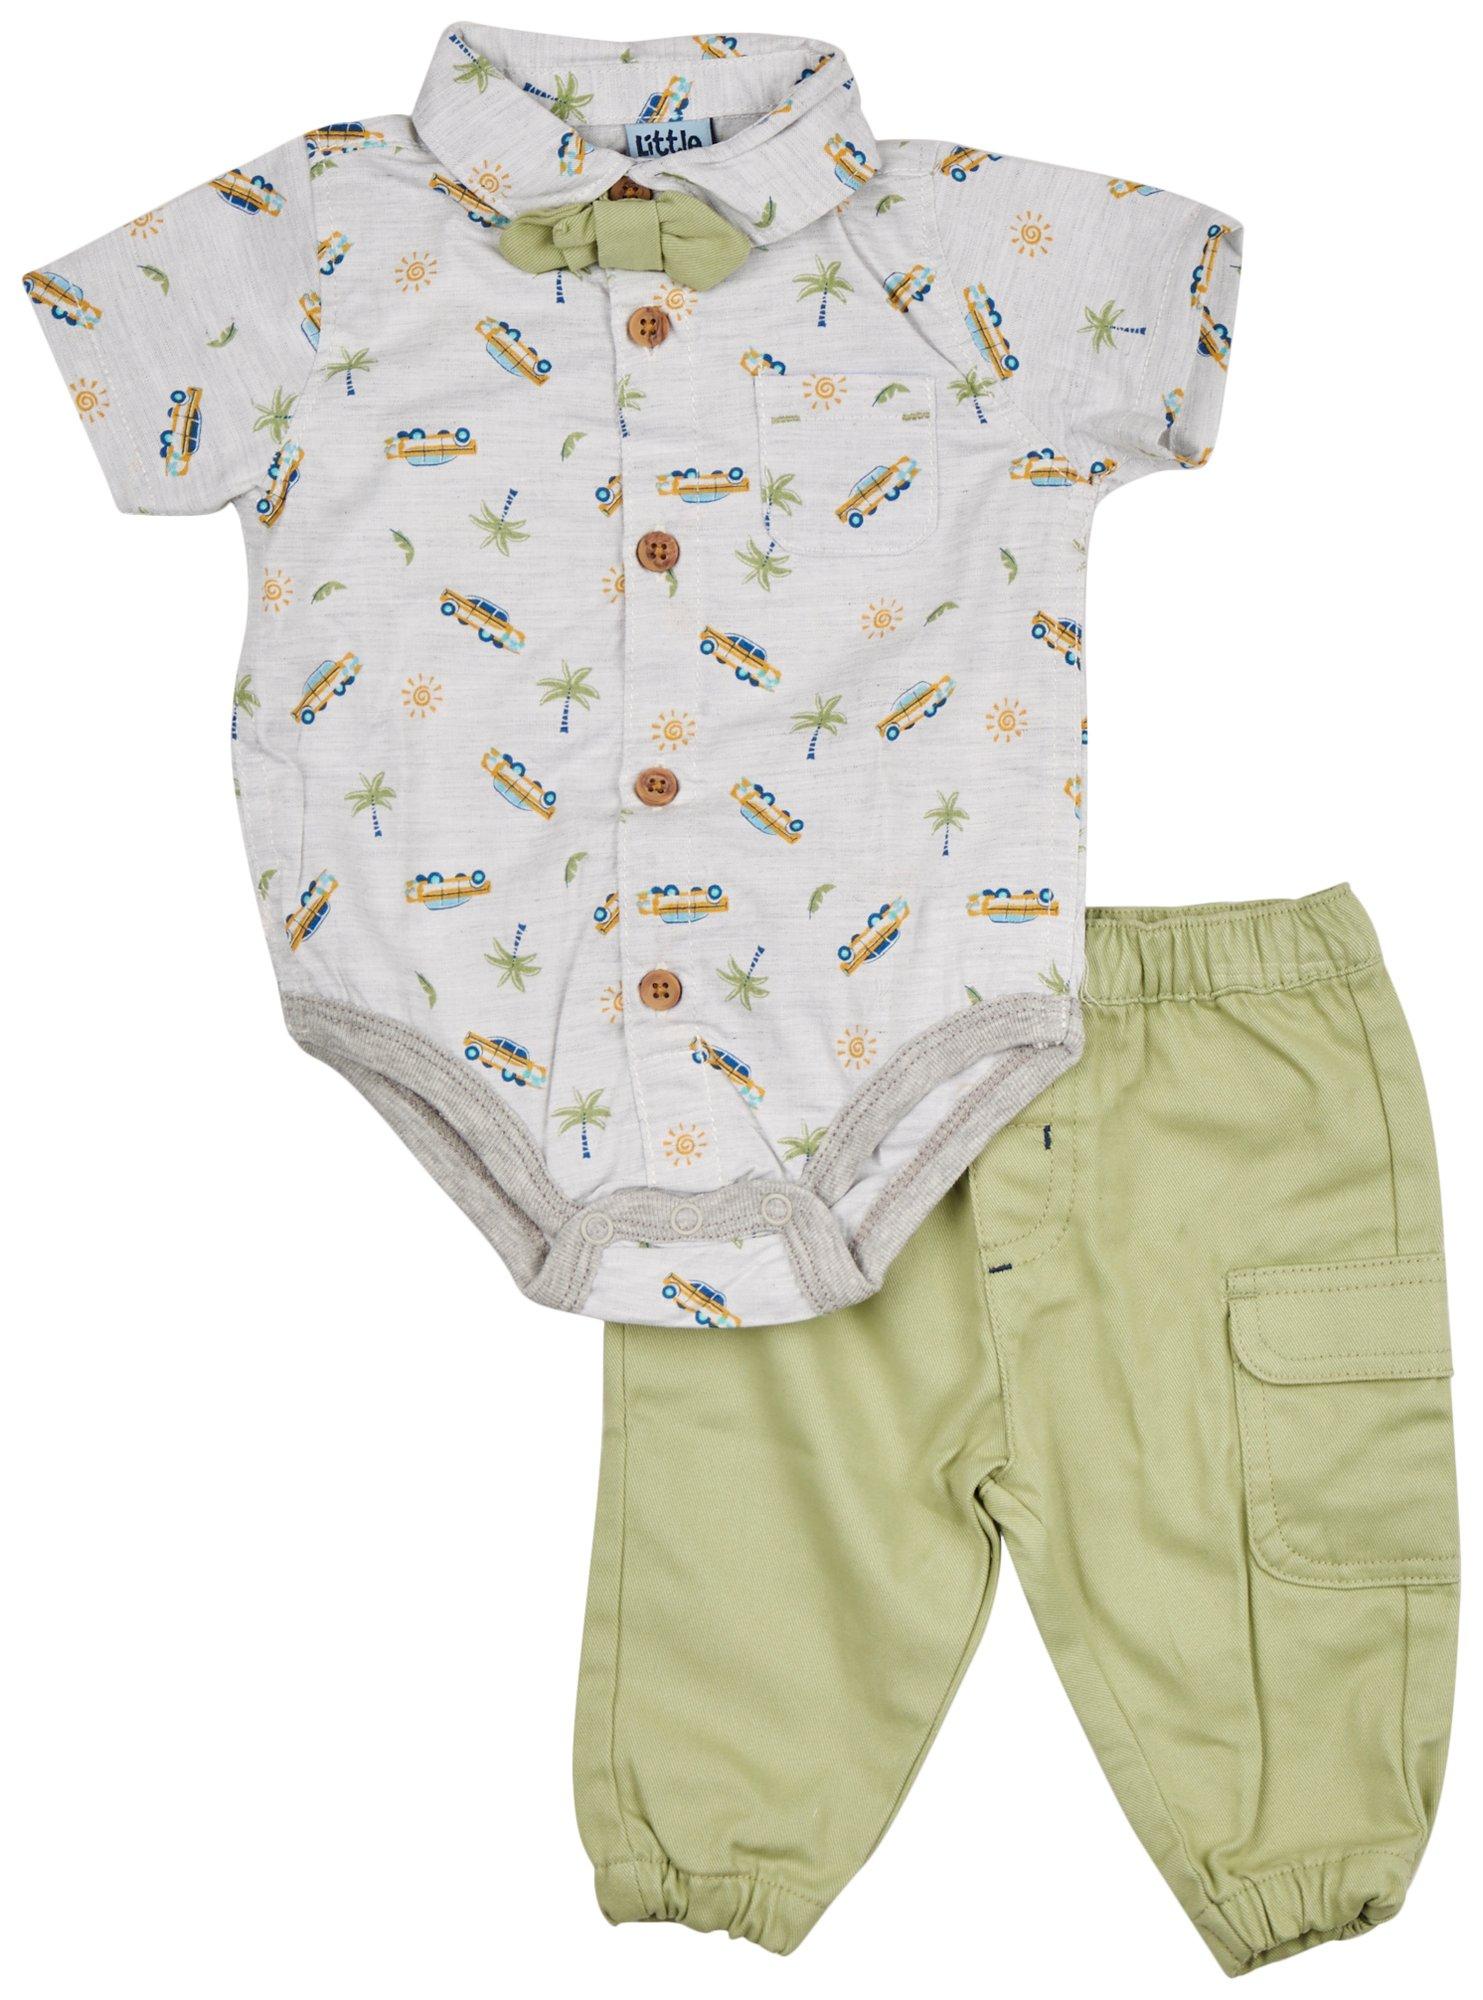 Little Lad Baby Boys 3-Pc. Woven Shirt Bow